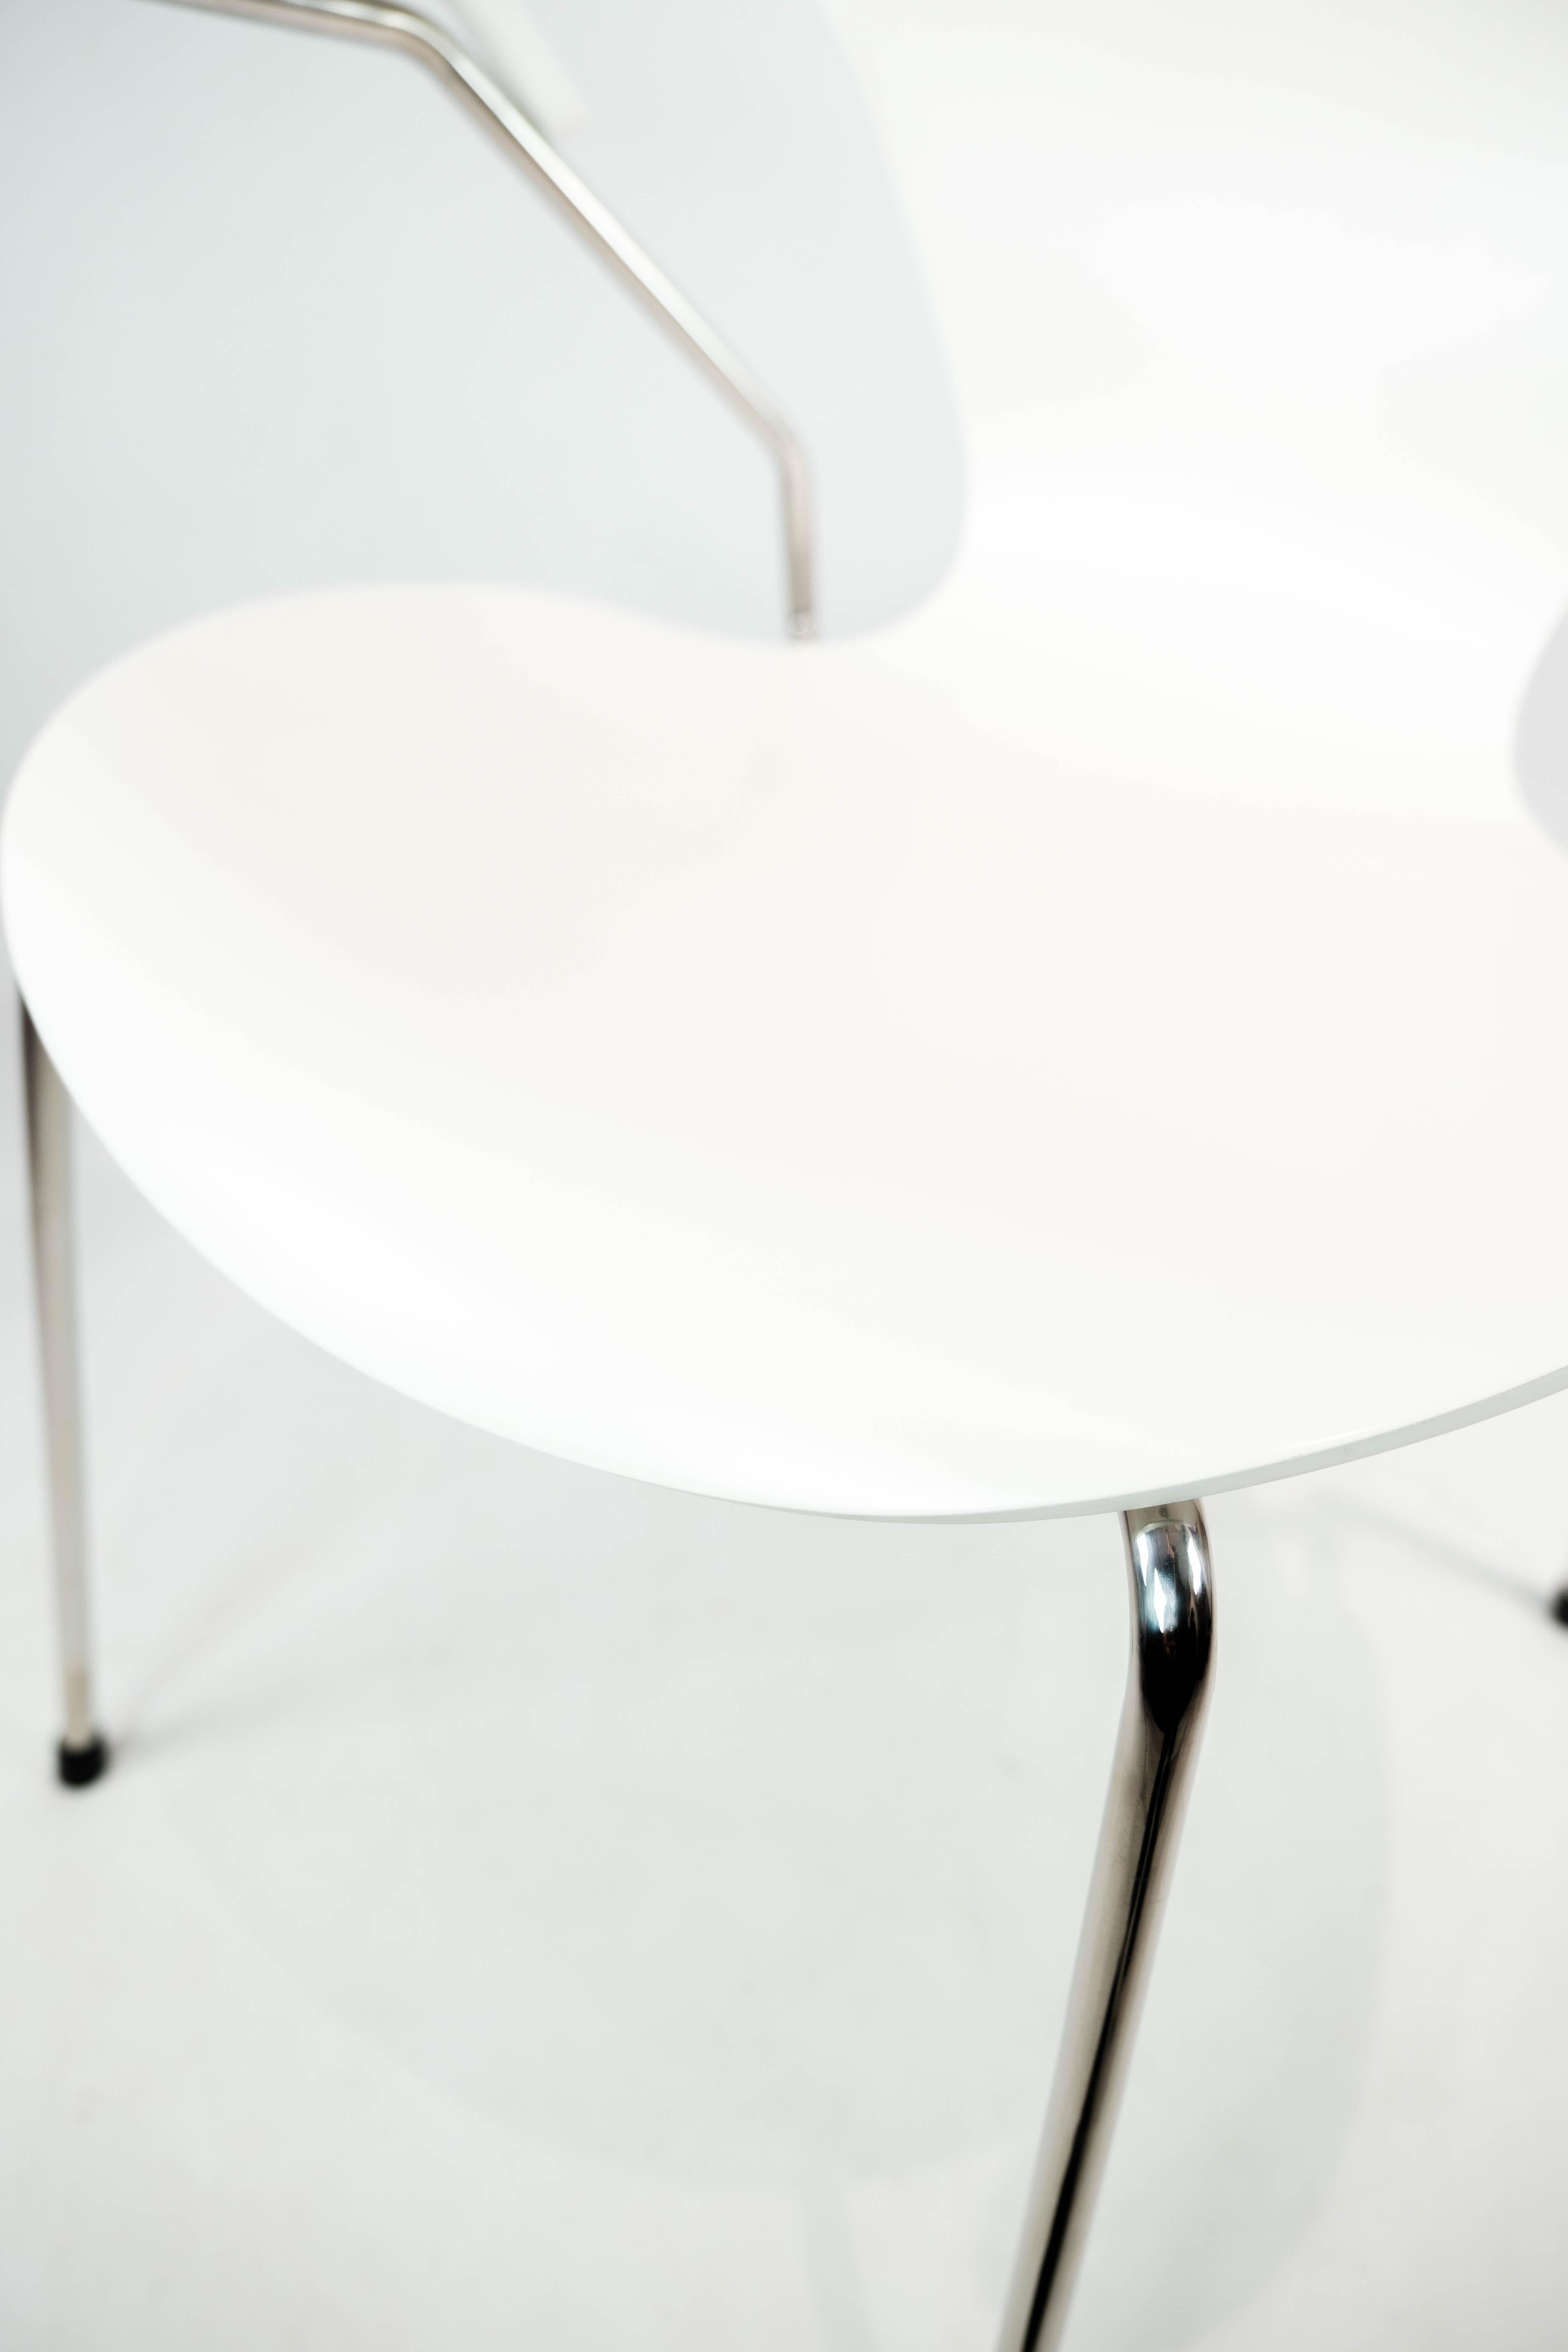 Mid-20th Century White Seven Chair, Model 3207, with Armrests by Arne Jacobsen and Fritz Hansen For Sale